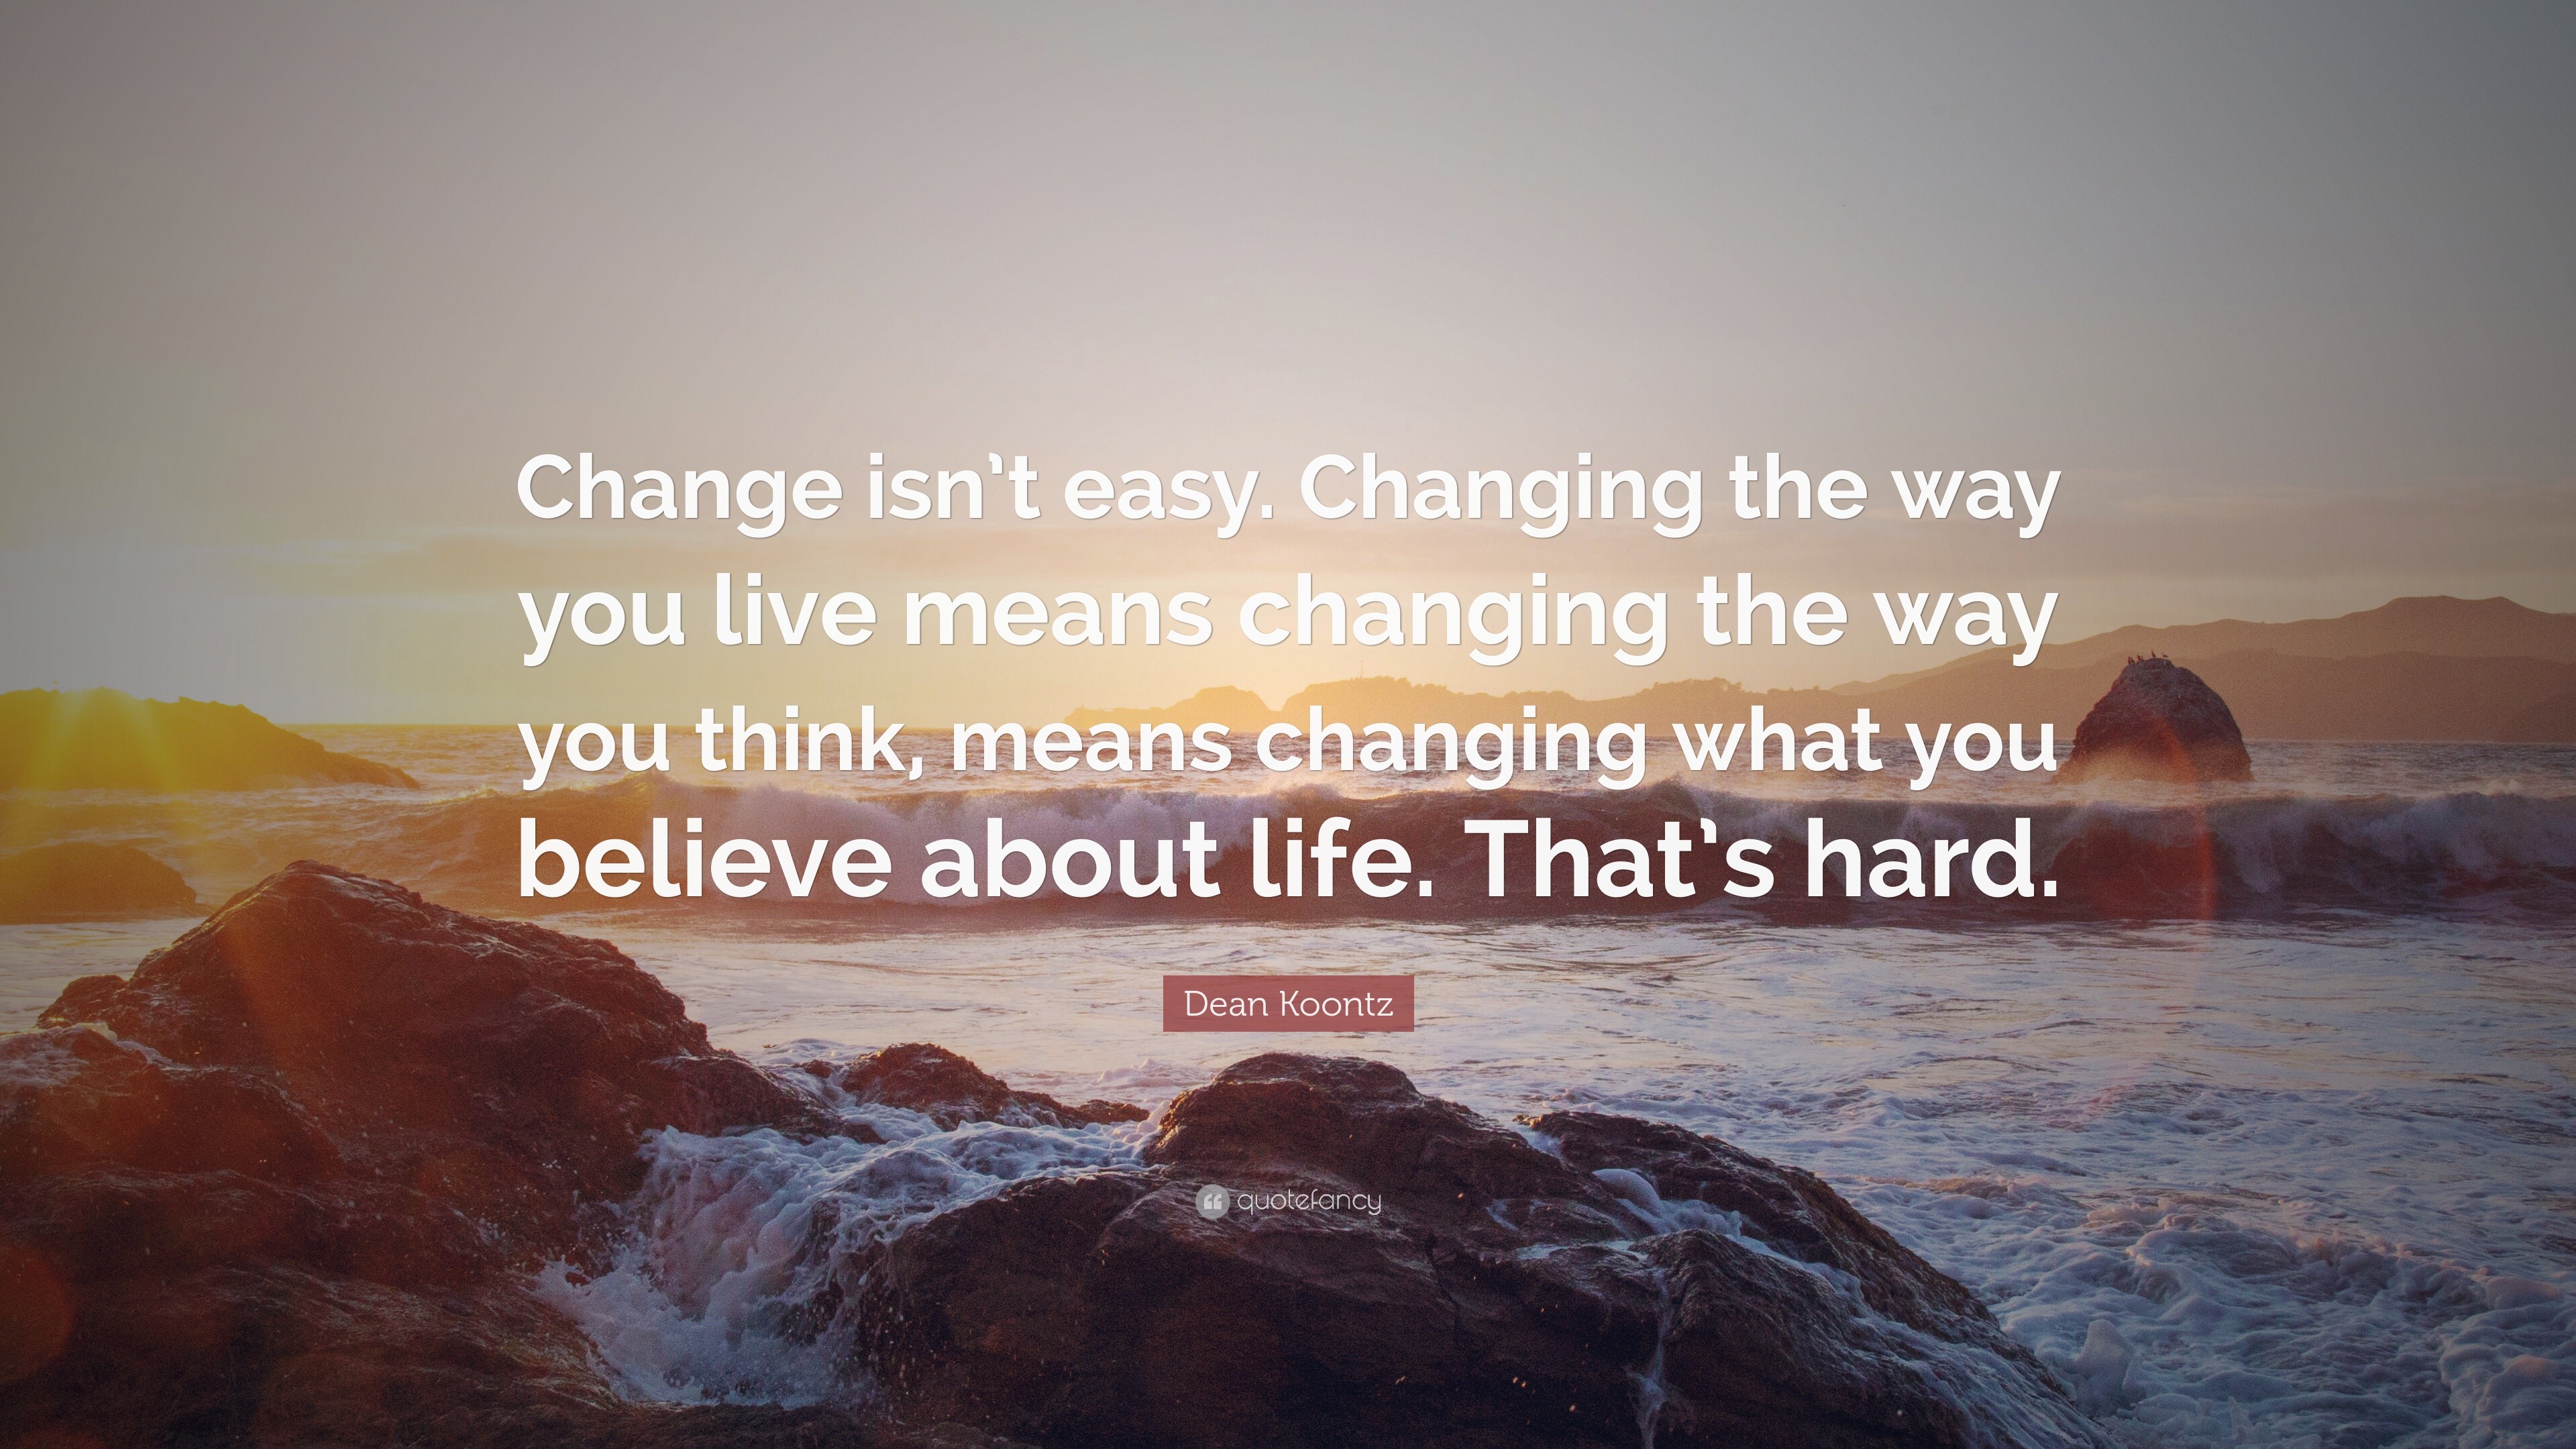 Dean Koontz Quote: “Change isn’t easy. Changing the way you live means ...